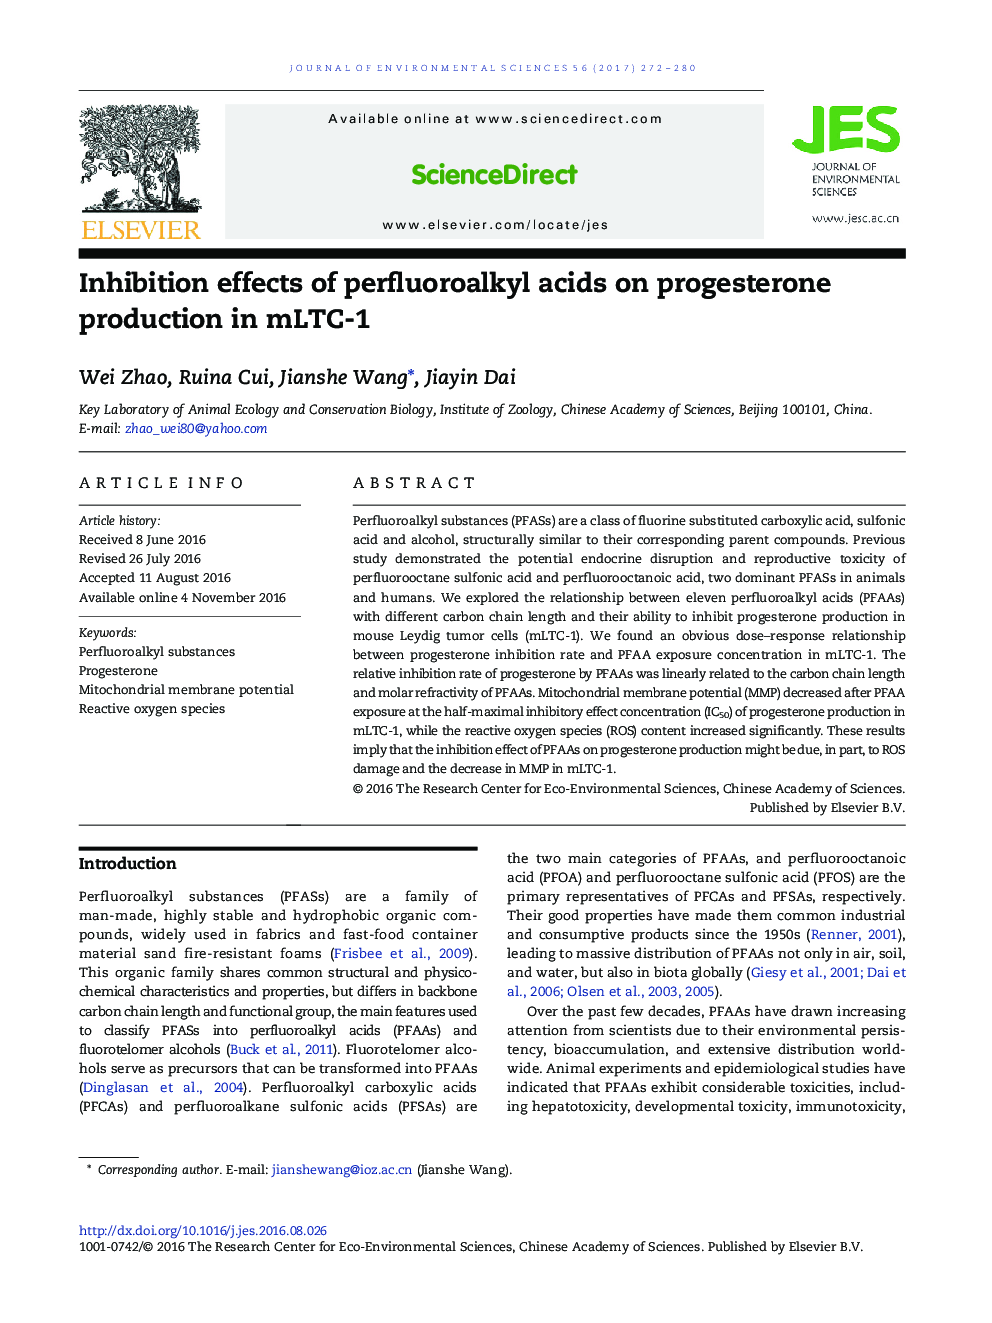 Inhibition effects of perfluoroalkyl acids on progesterone production in mLTC-1